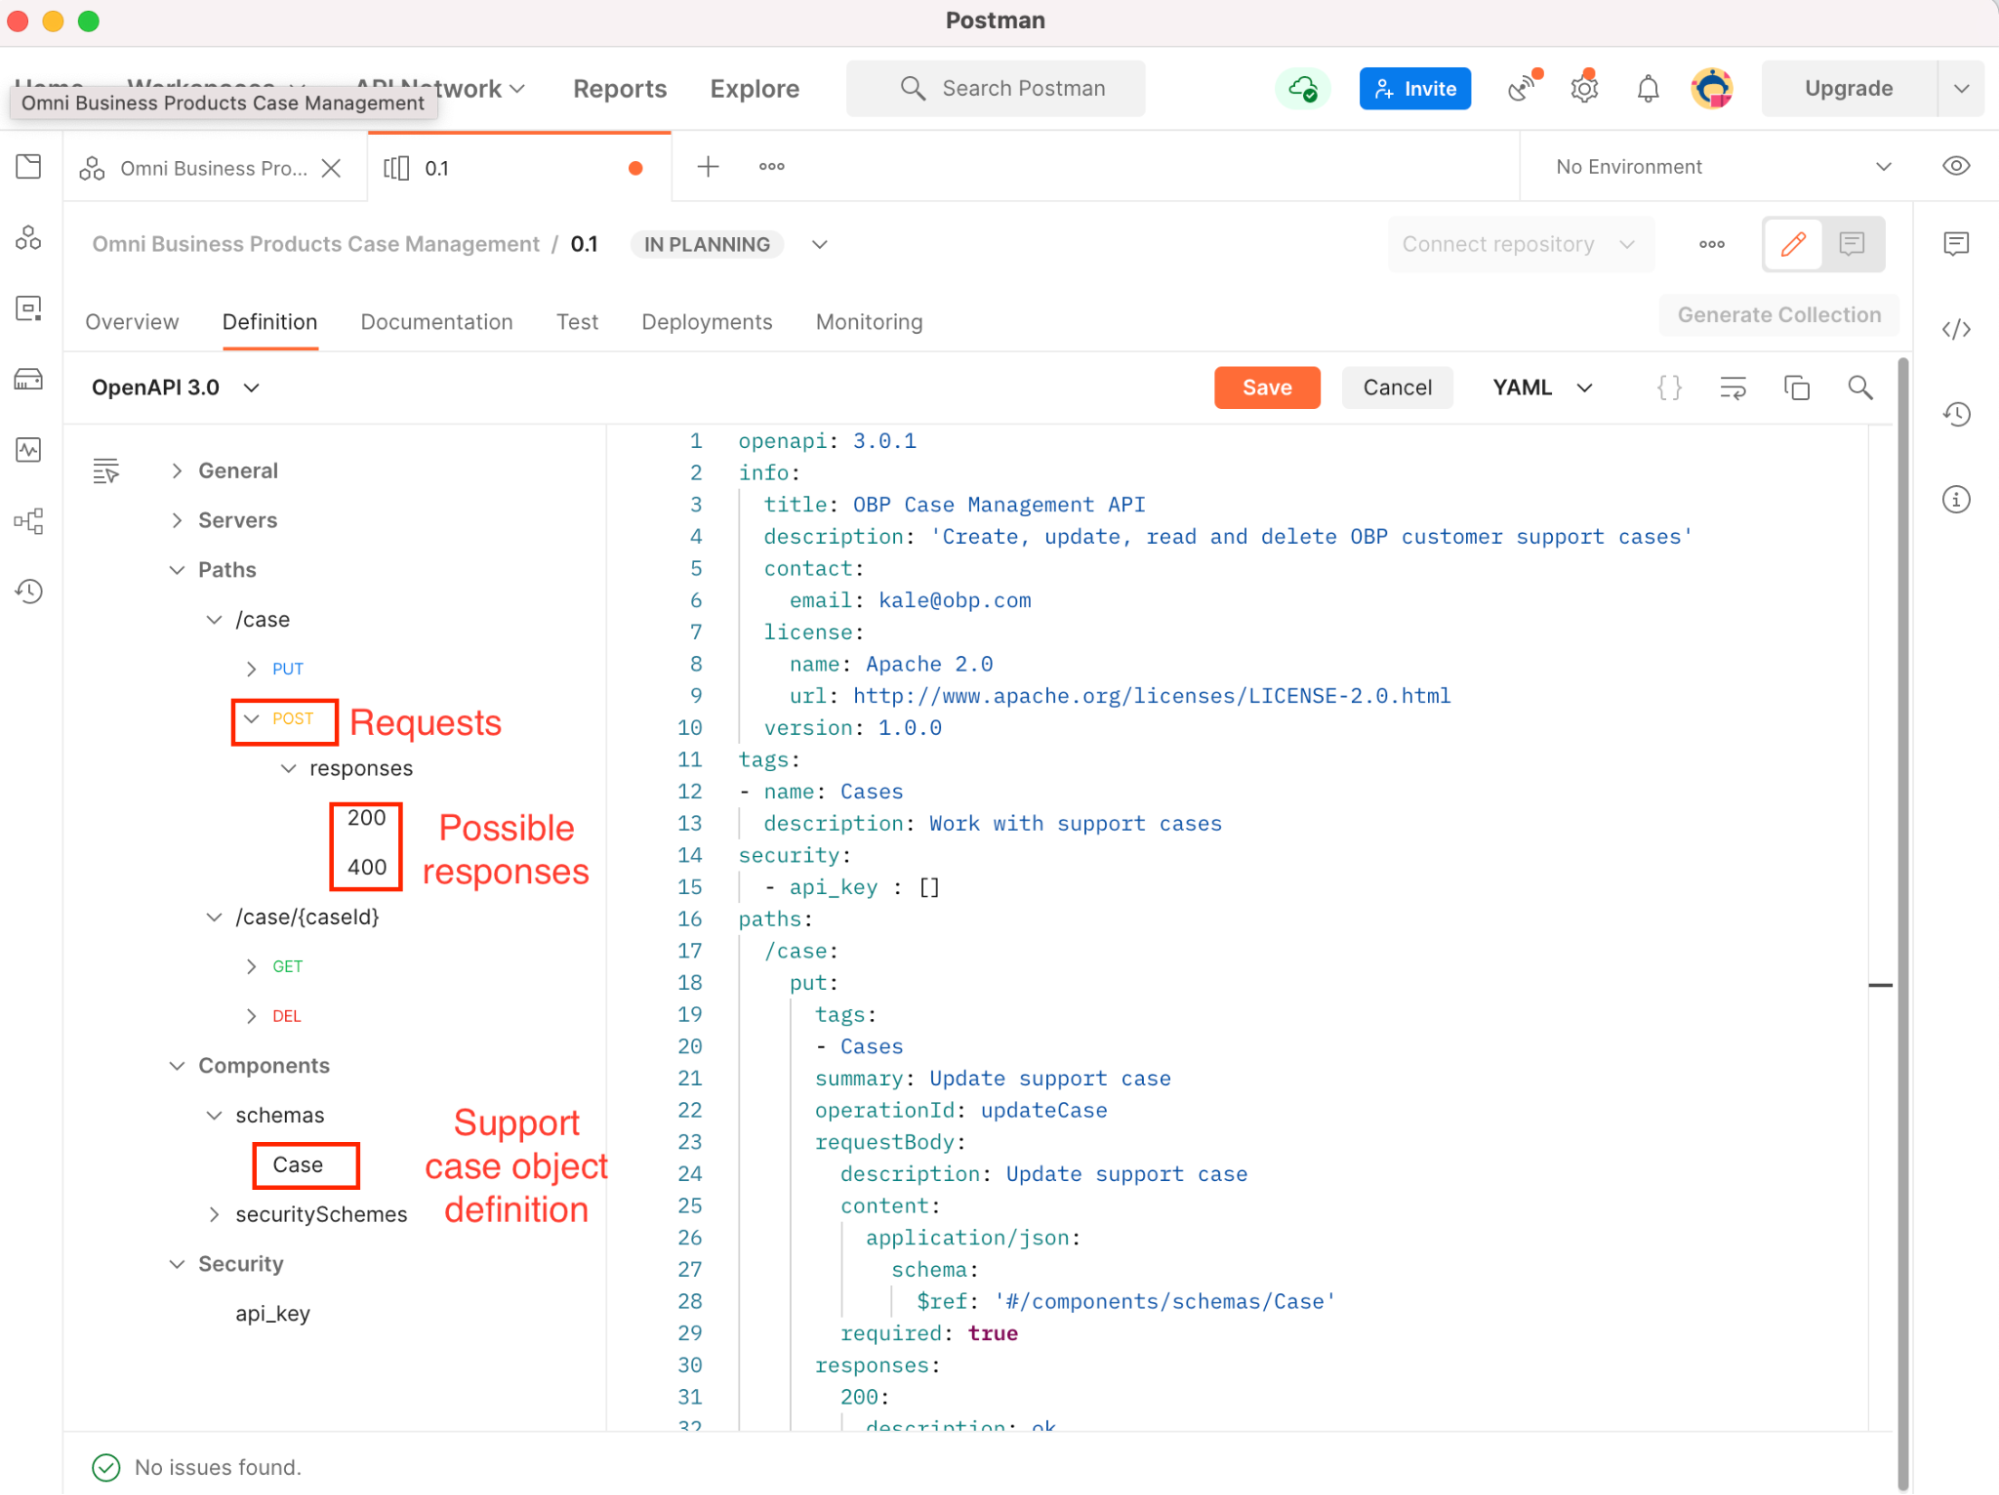 OpenAPI document drafted in Postman